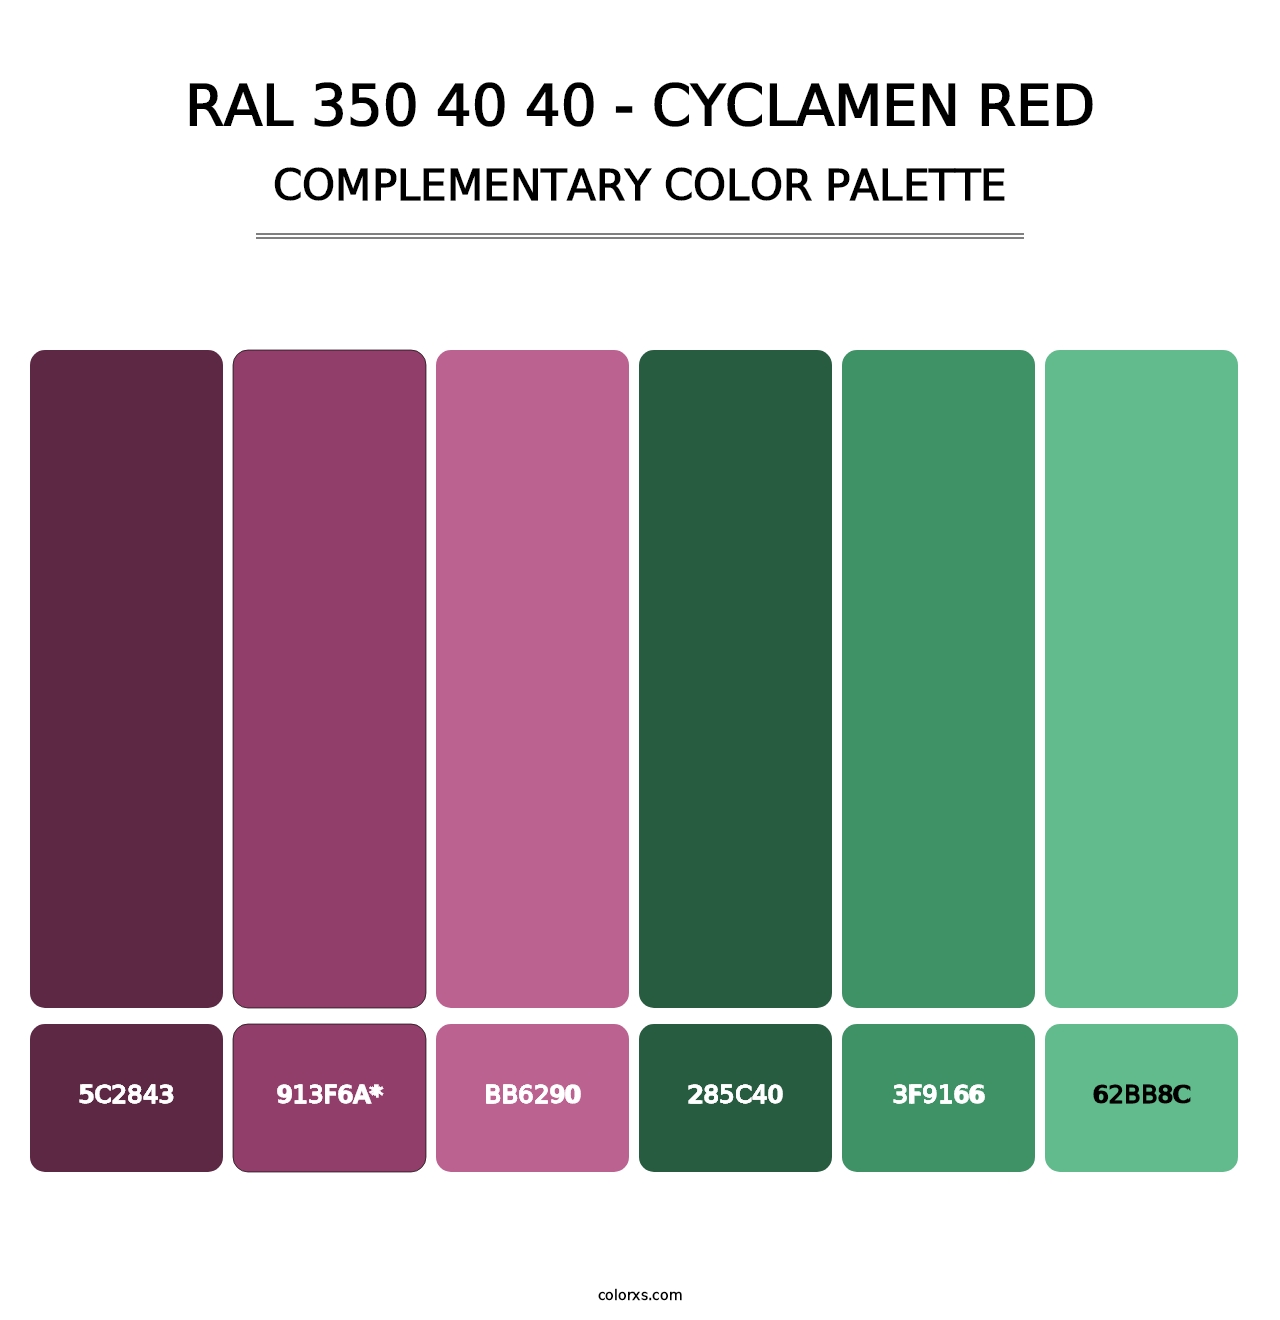 RAL 350 40 40 - Cyclamen Red - Complementary Color Palette